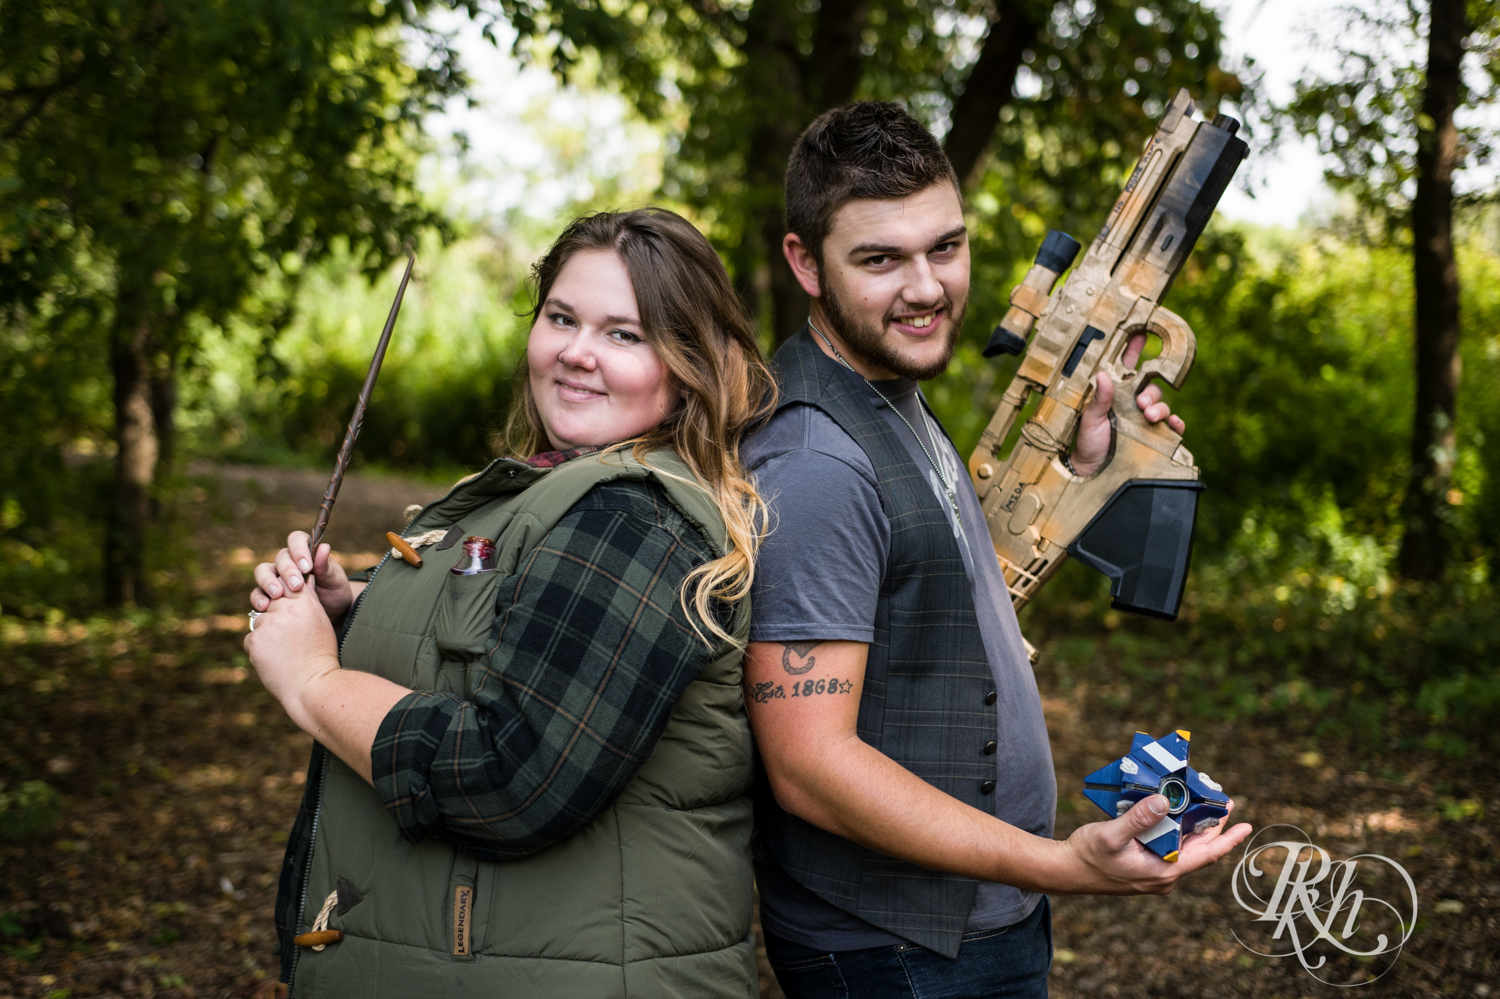 Man with XBox gun and woman with Harry Potter wand smile during engagement session in woods in Plymouth, Minnesota.